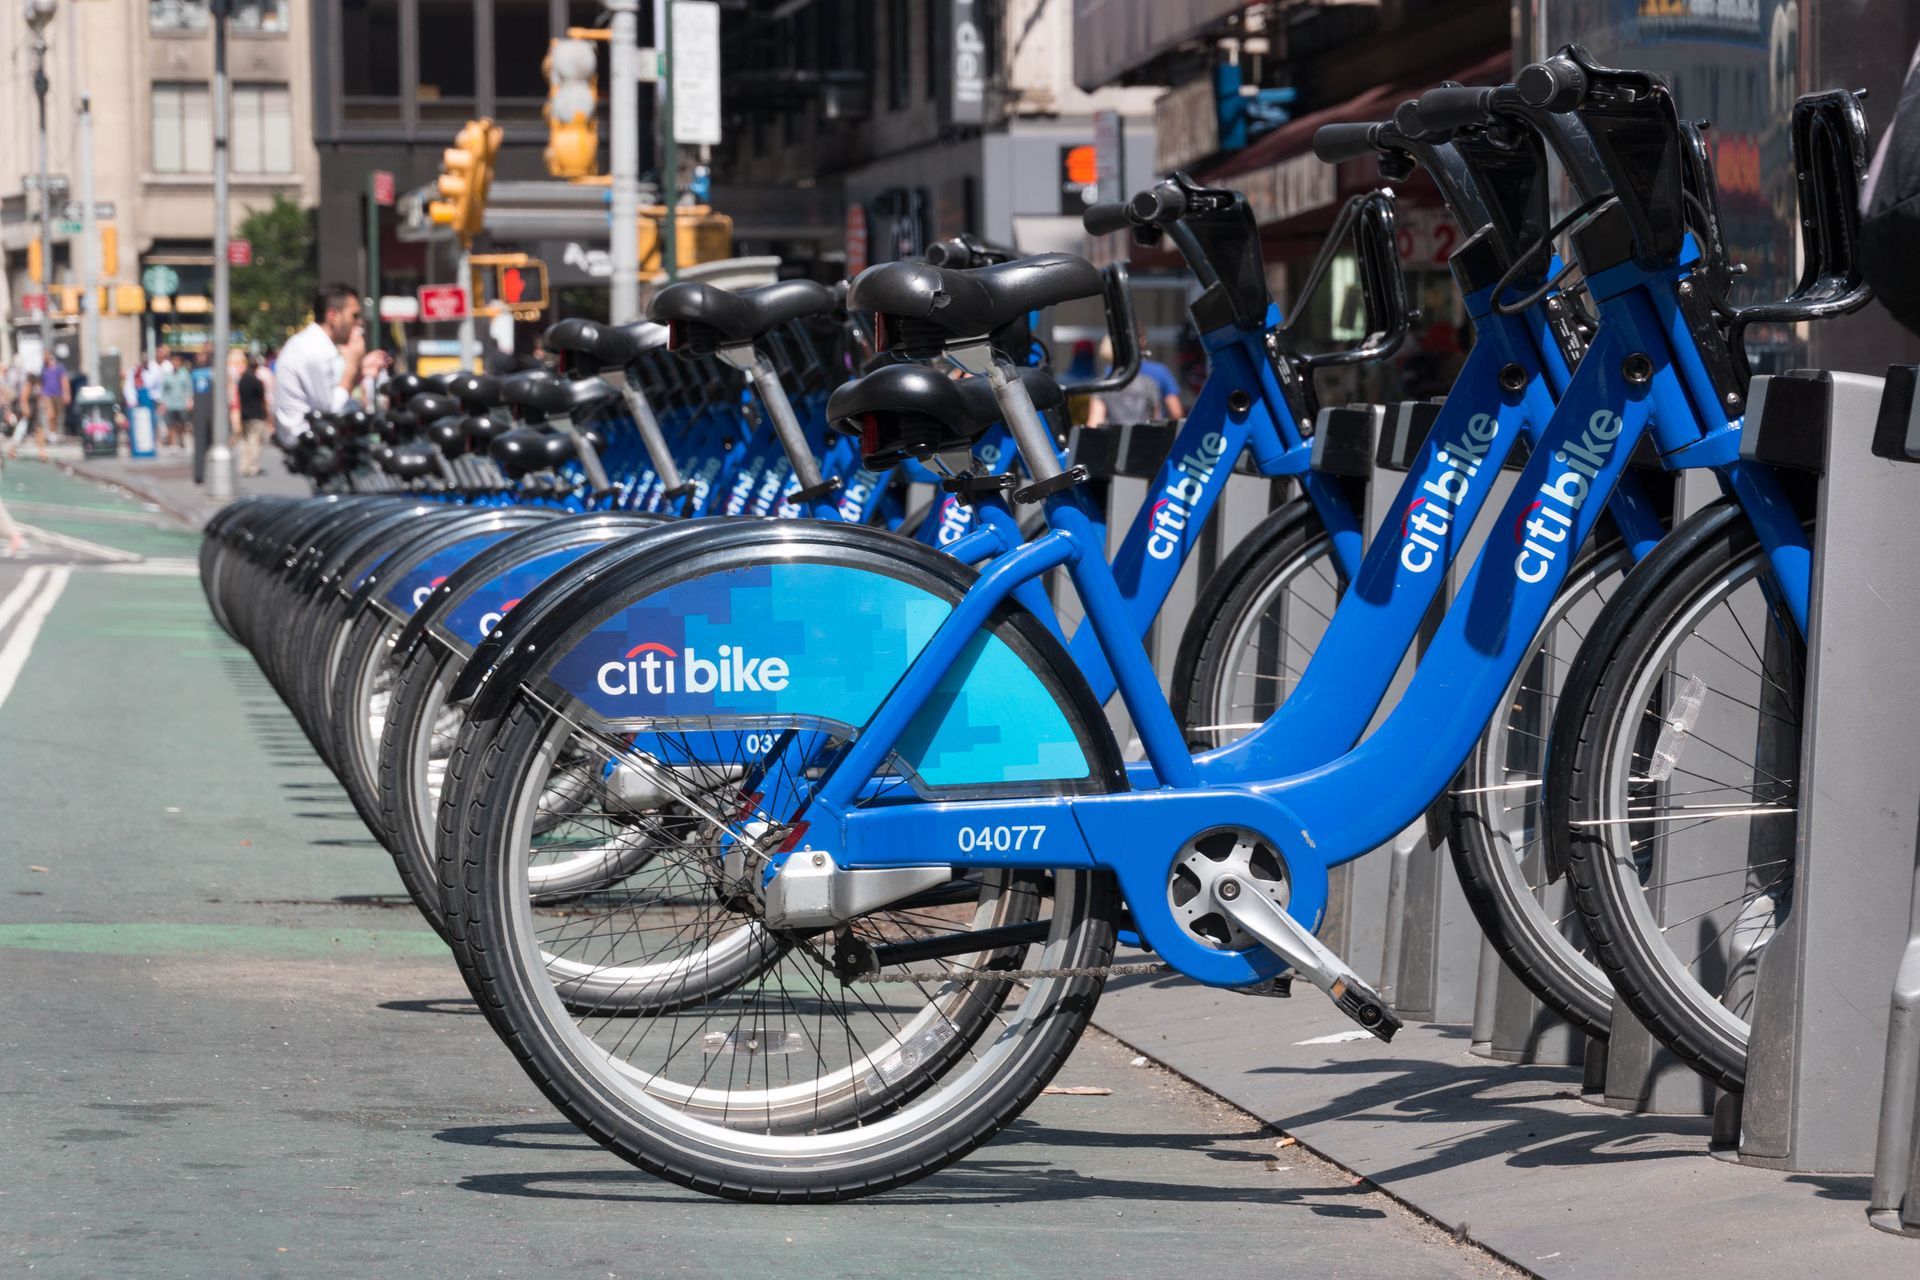 Citi-Bike ride share bicycles docked waiting for hire in NYC